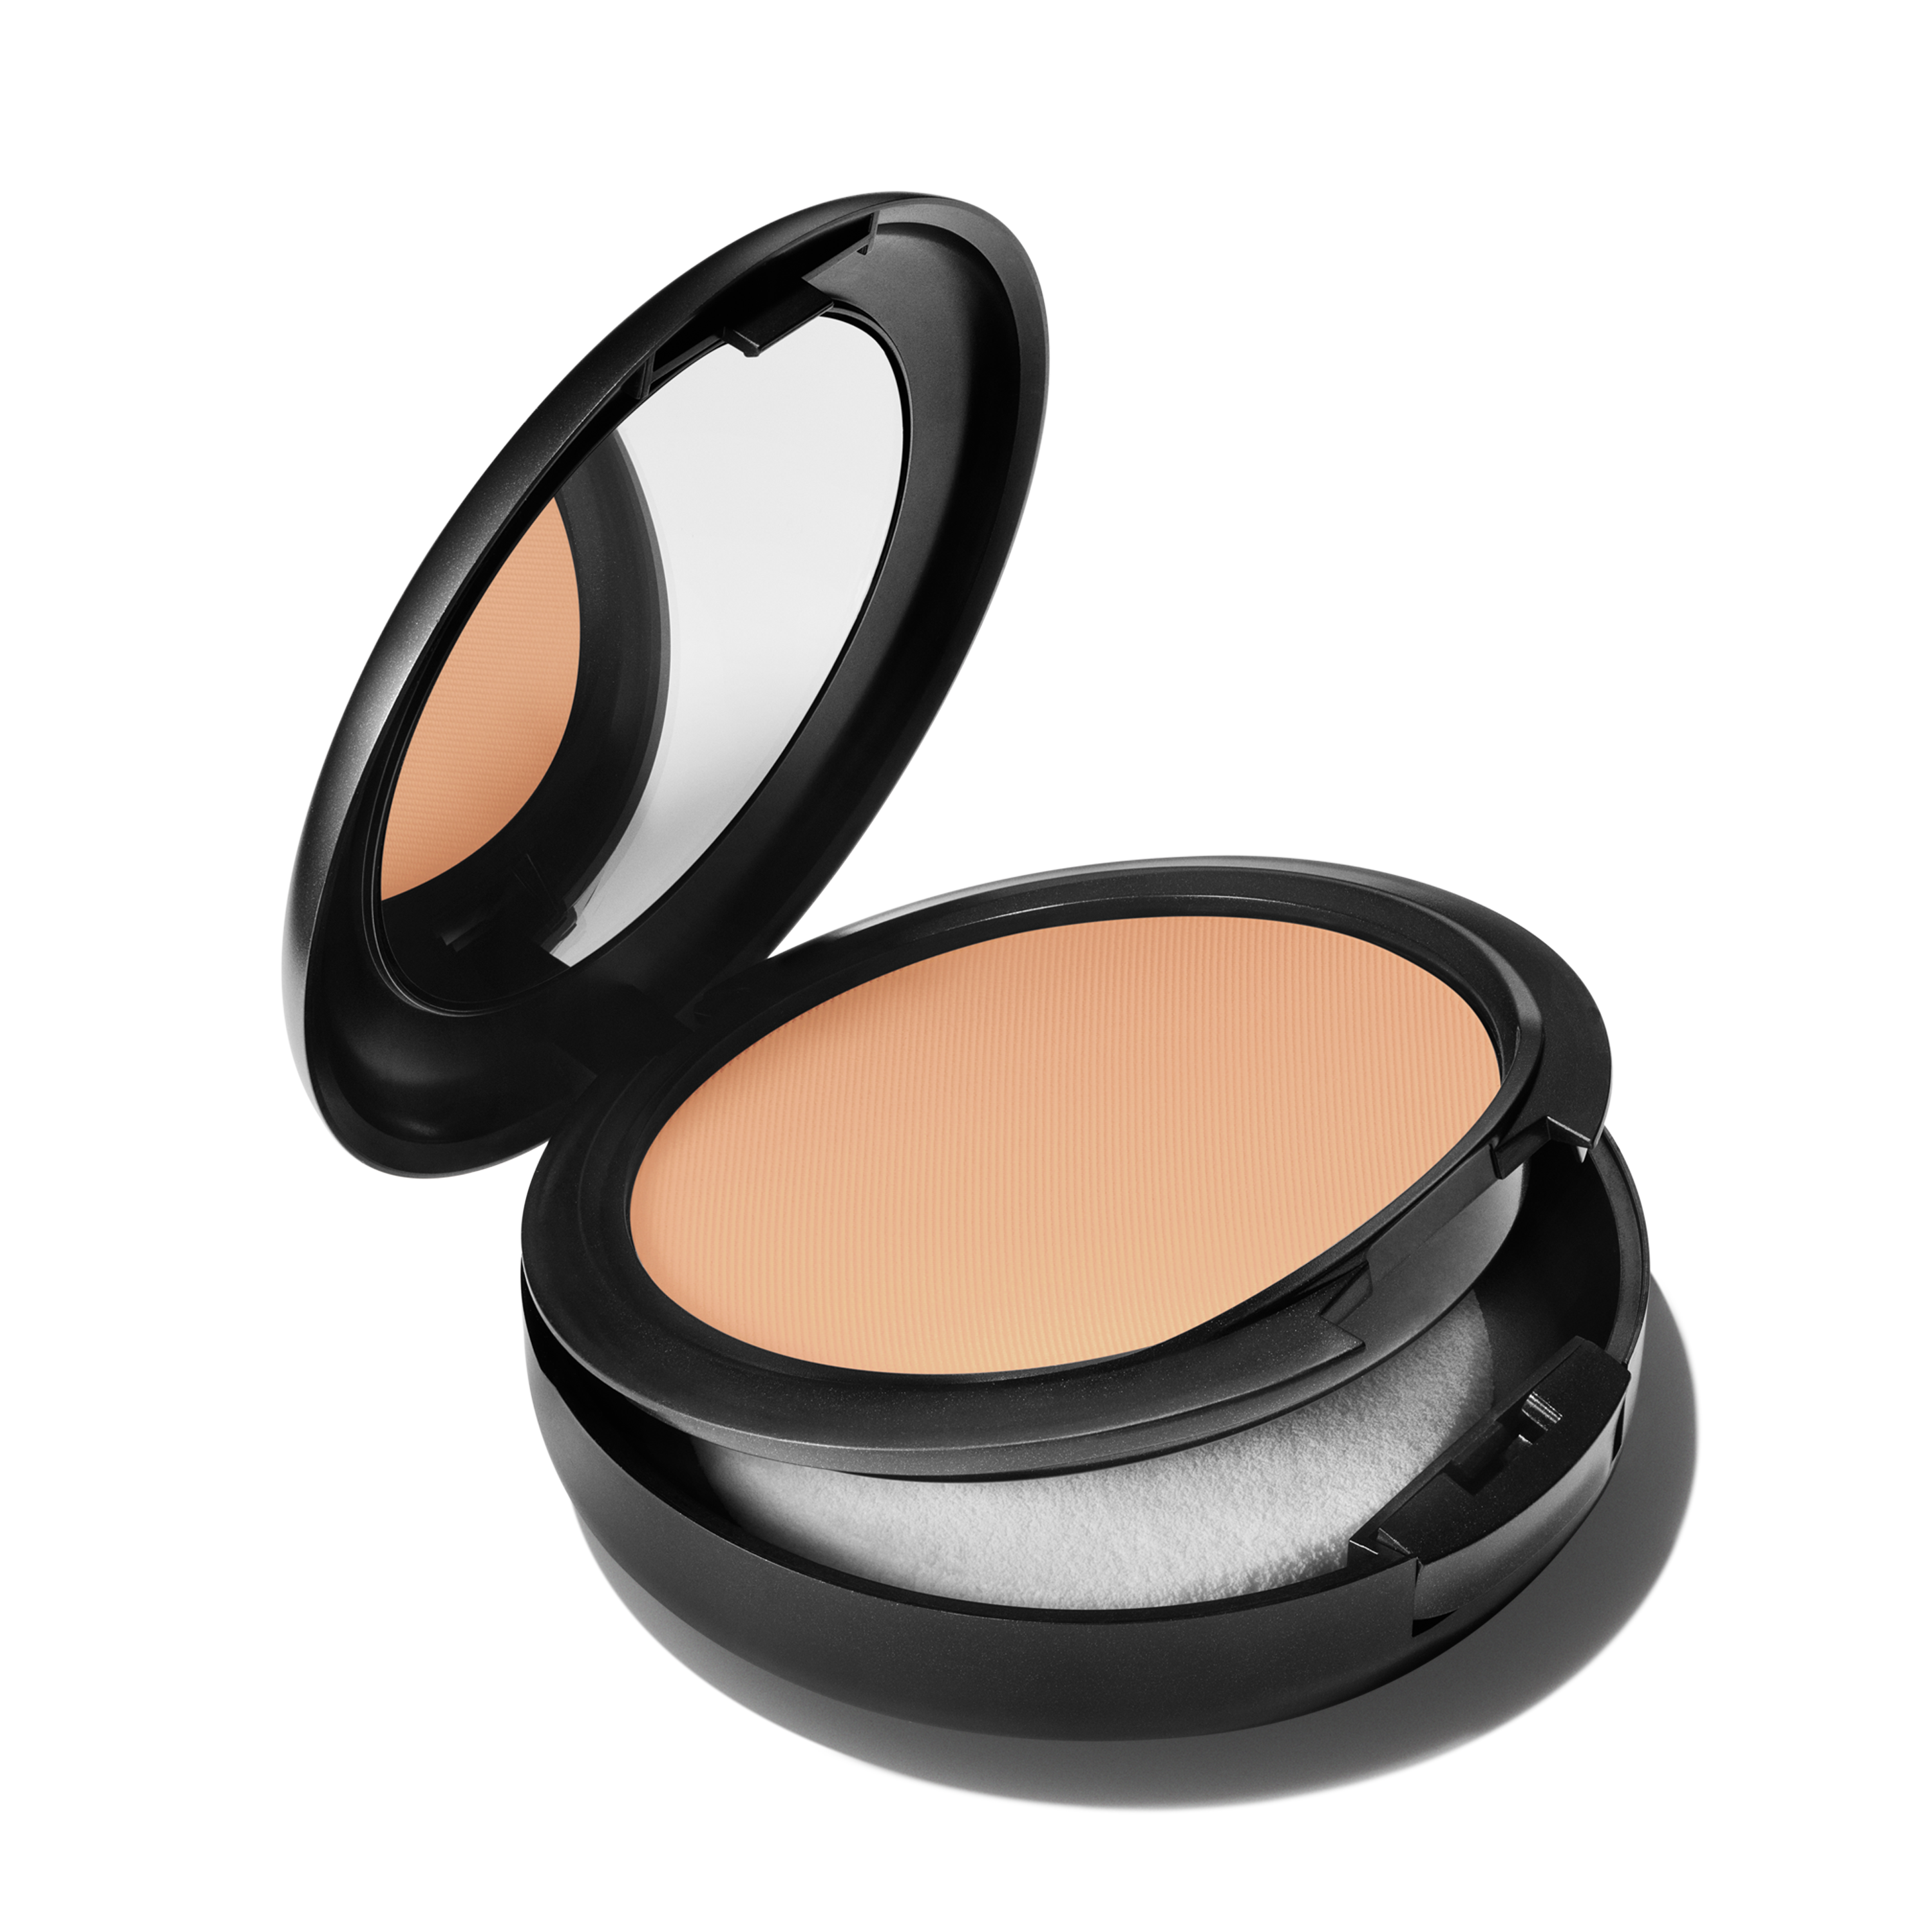 Maybelline New York Fit Me Ultimate Powder Foundation - Shade 310 (9g)